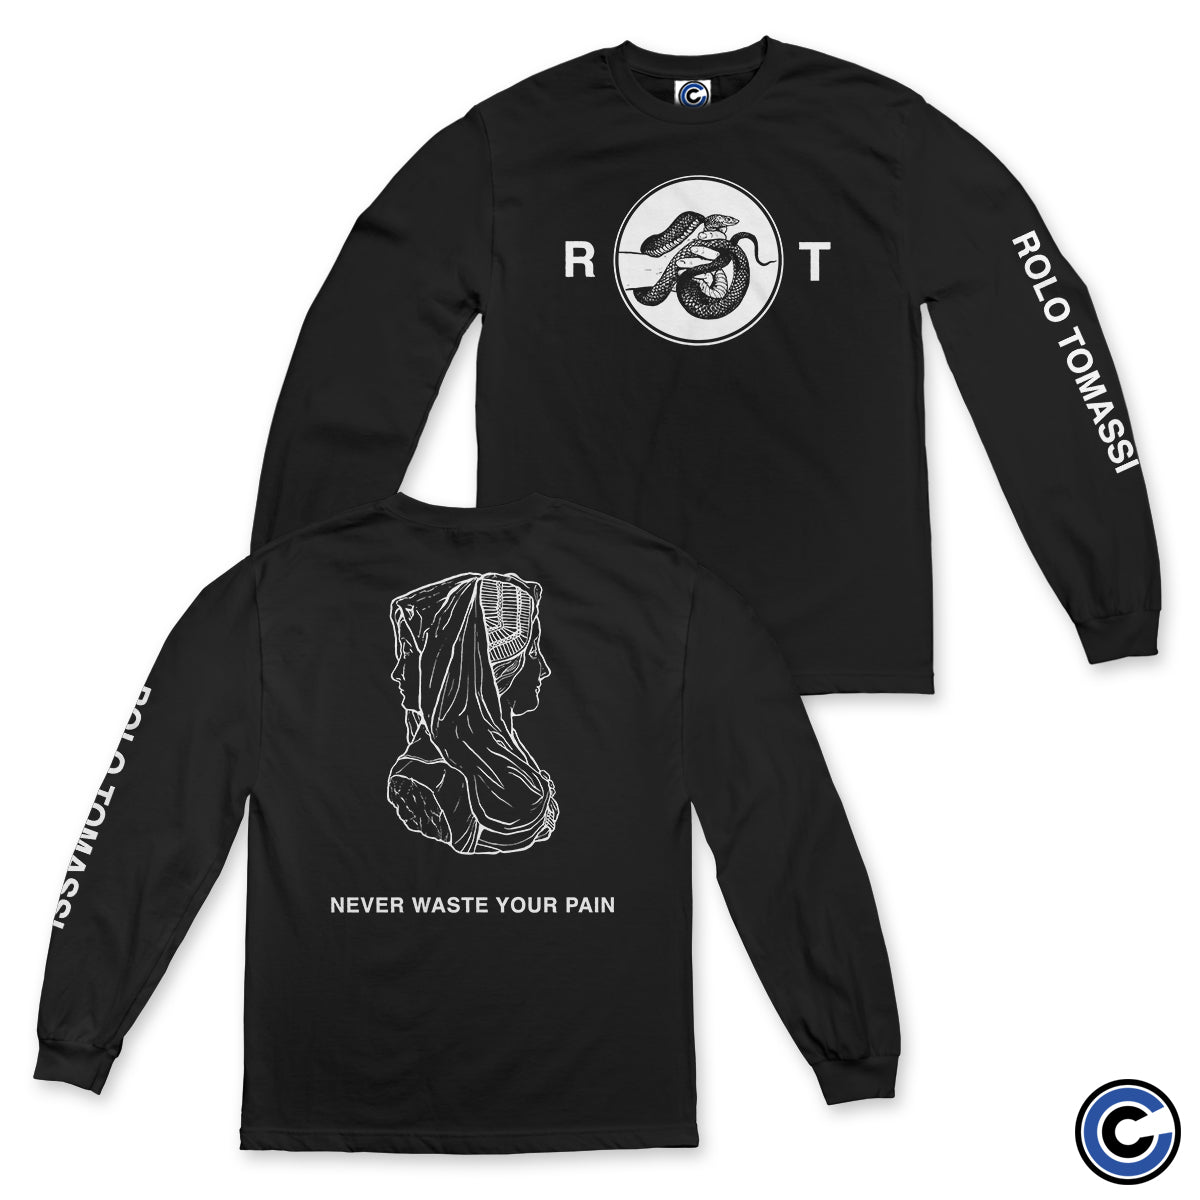 Rolo Tomassi "New Snake" Long Sleeve